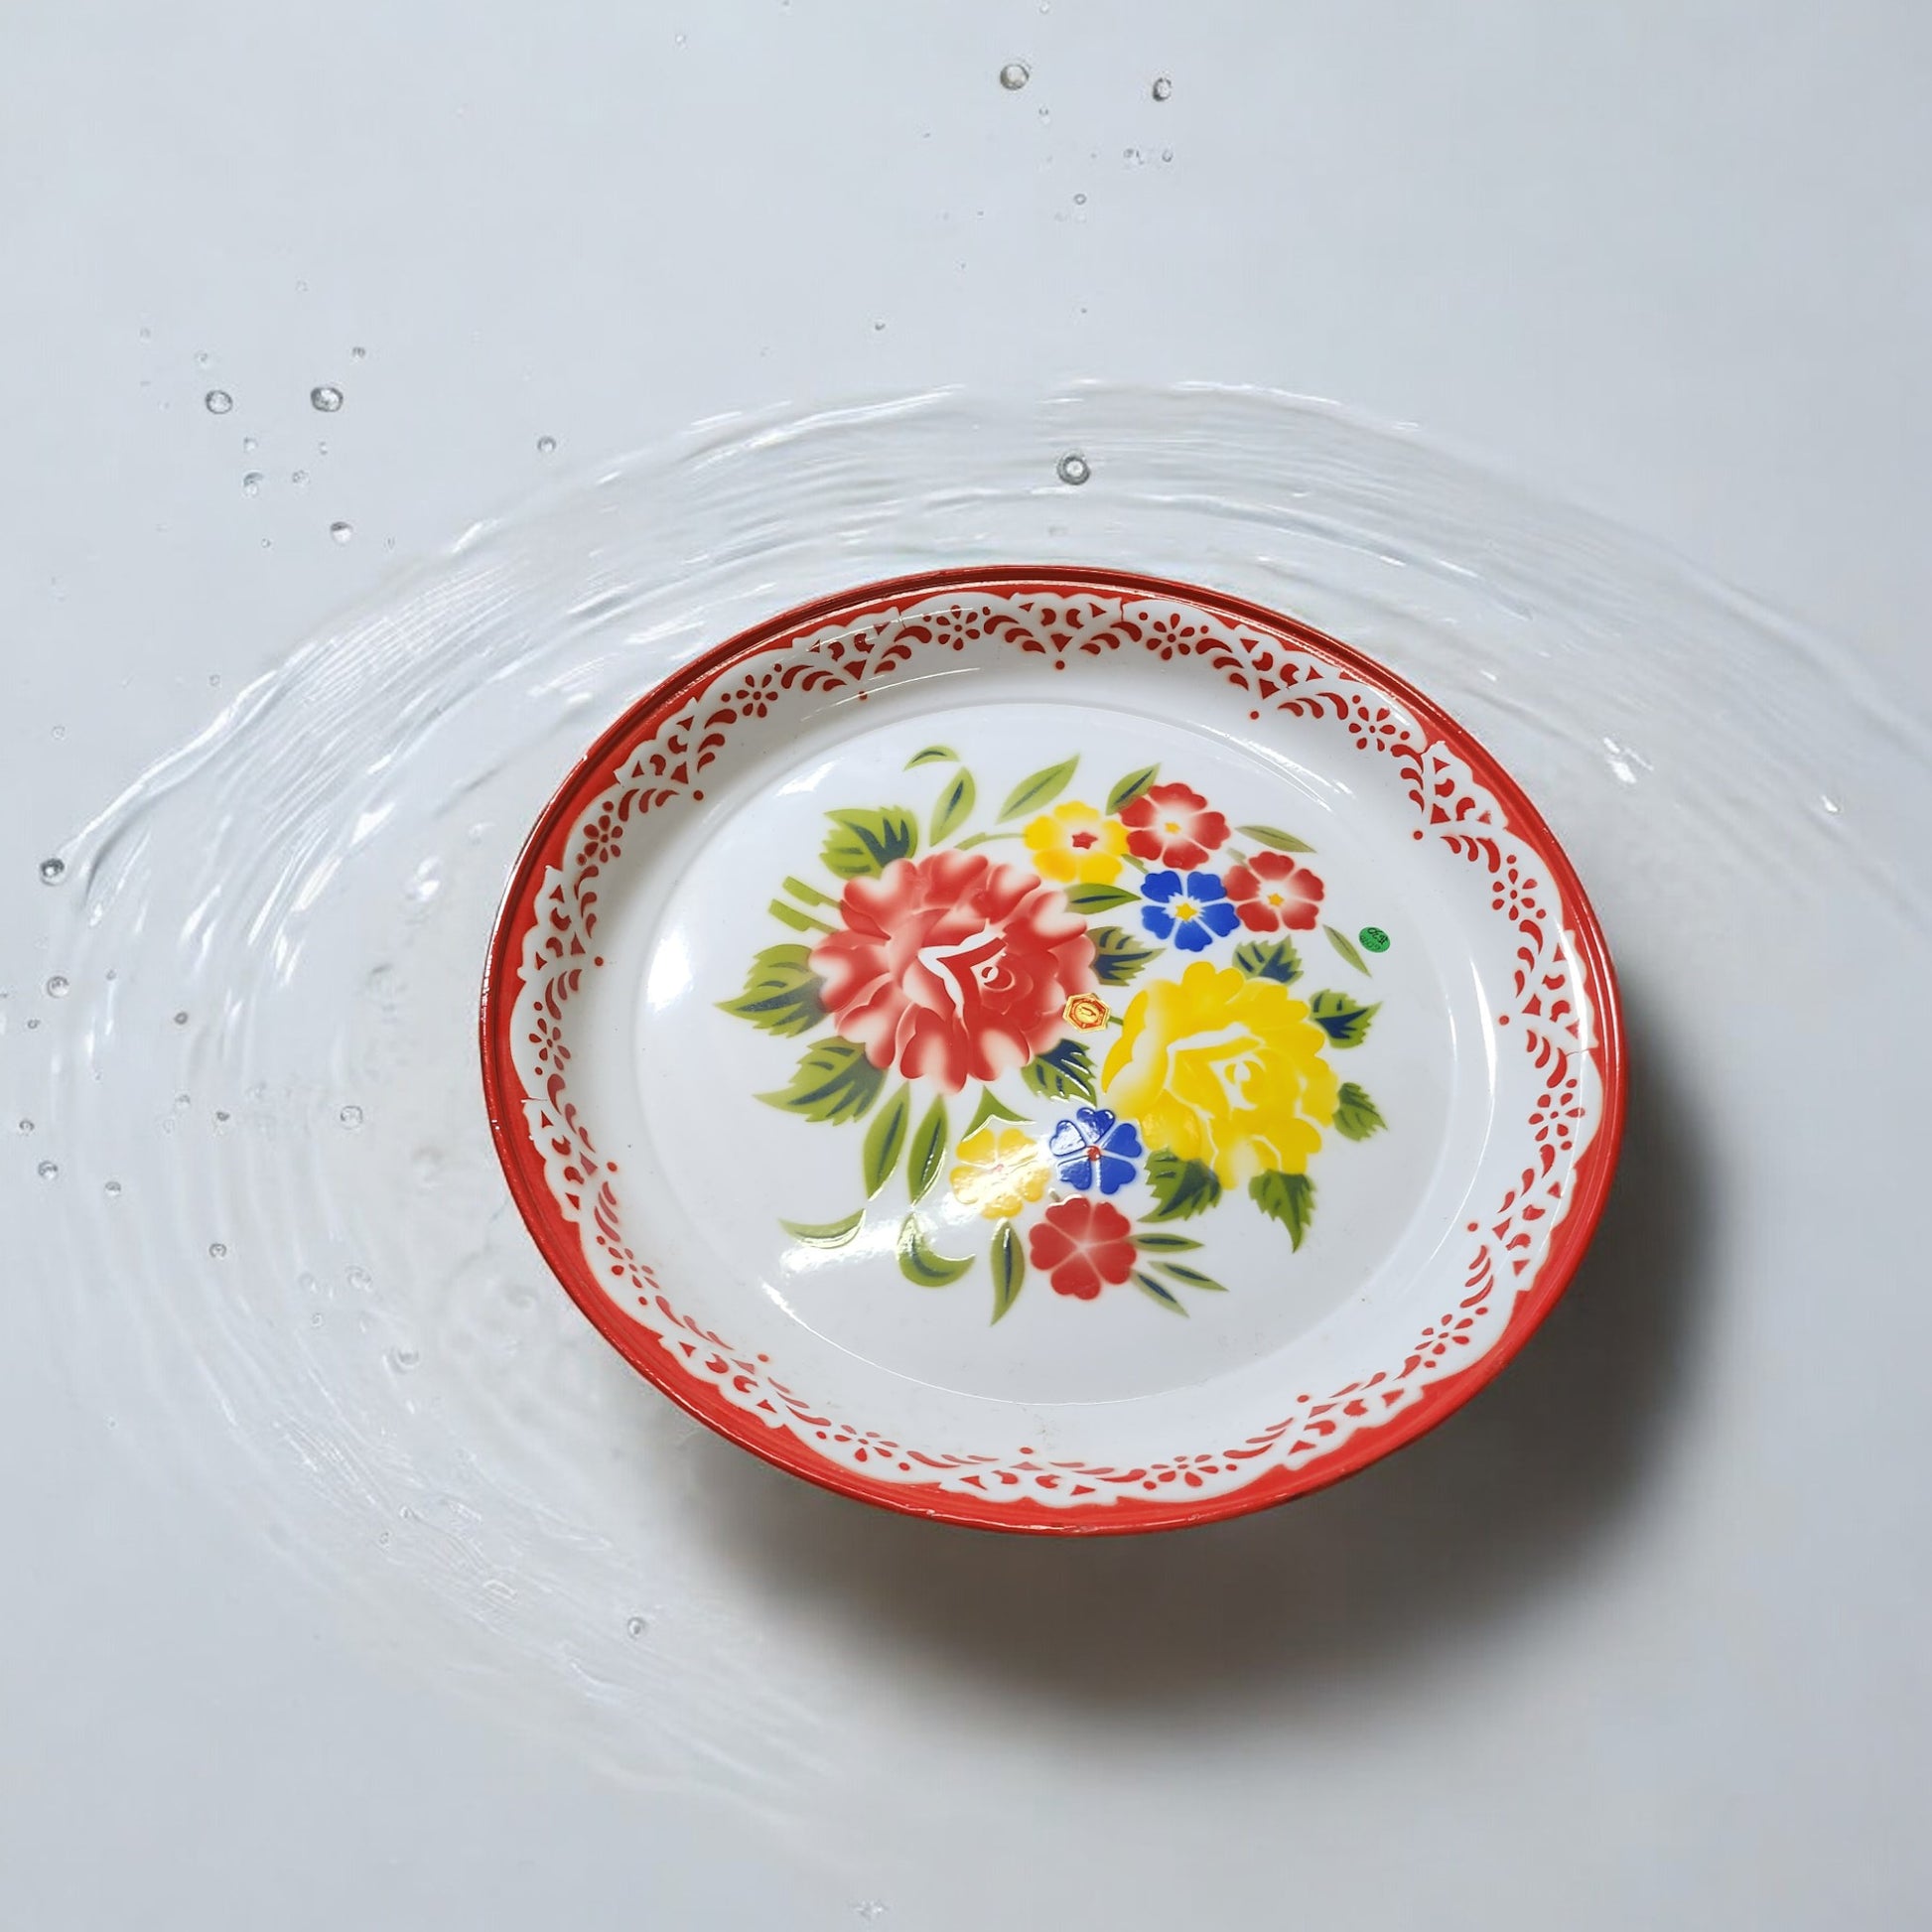 Serving Platter with Flowers 16" to 24" Diameter